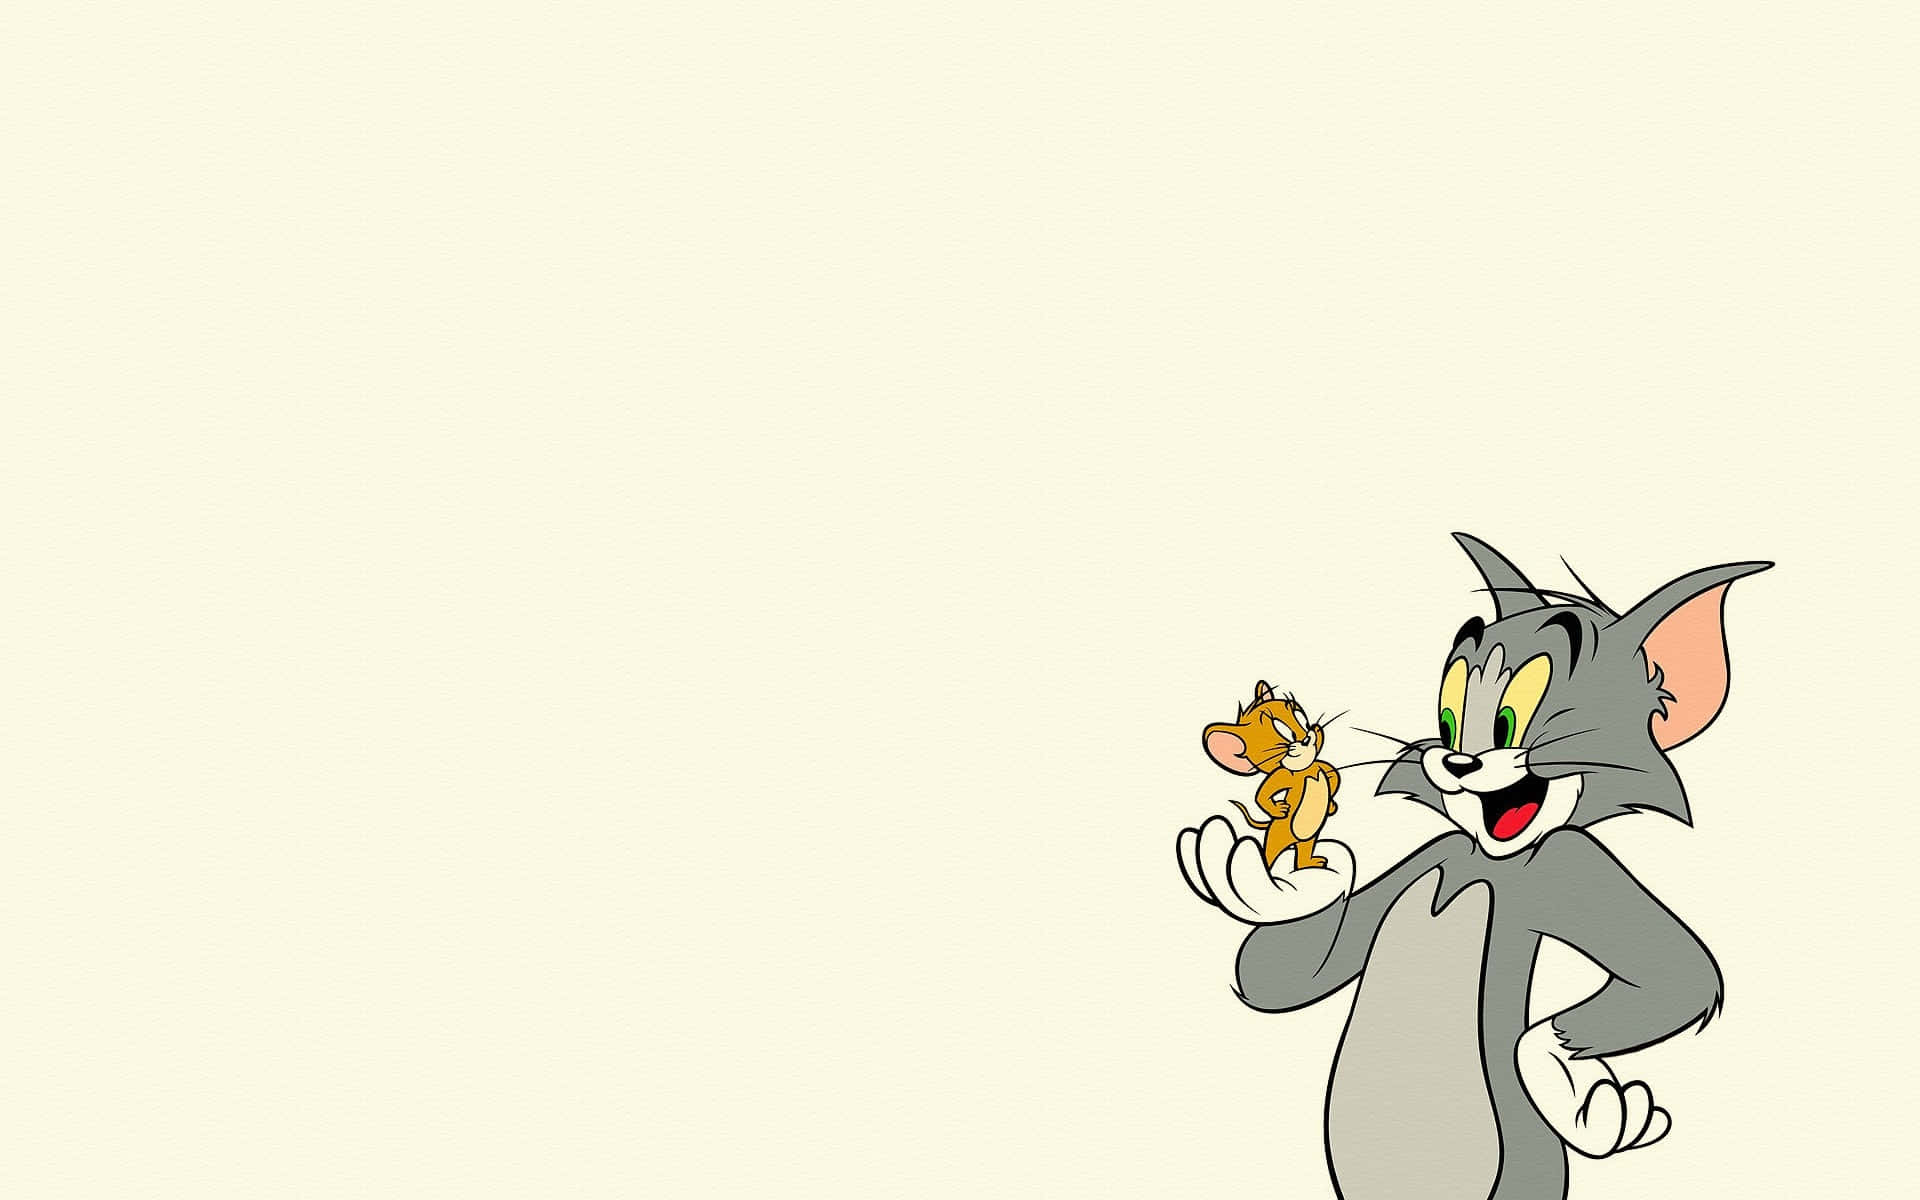 Tom and Jerry try to outsmart each other